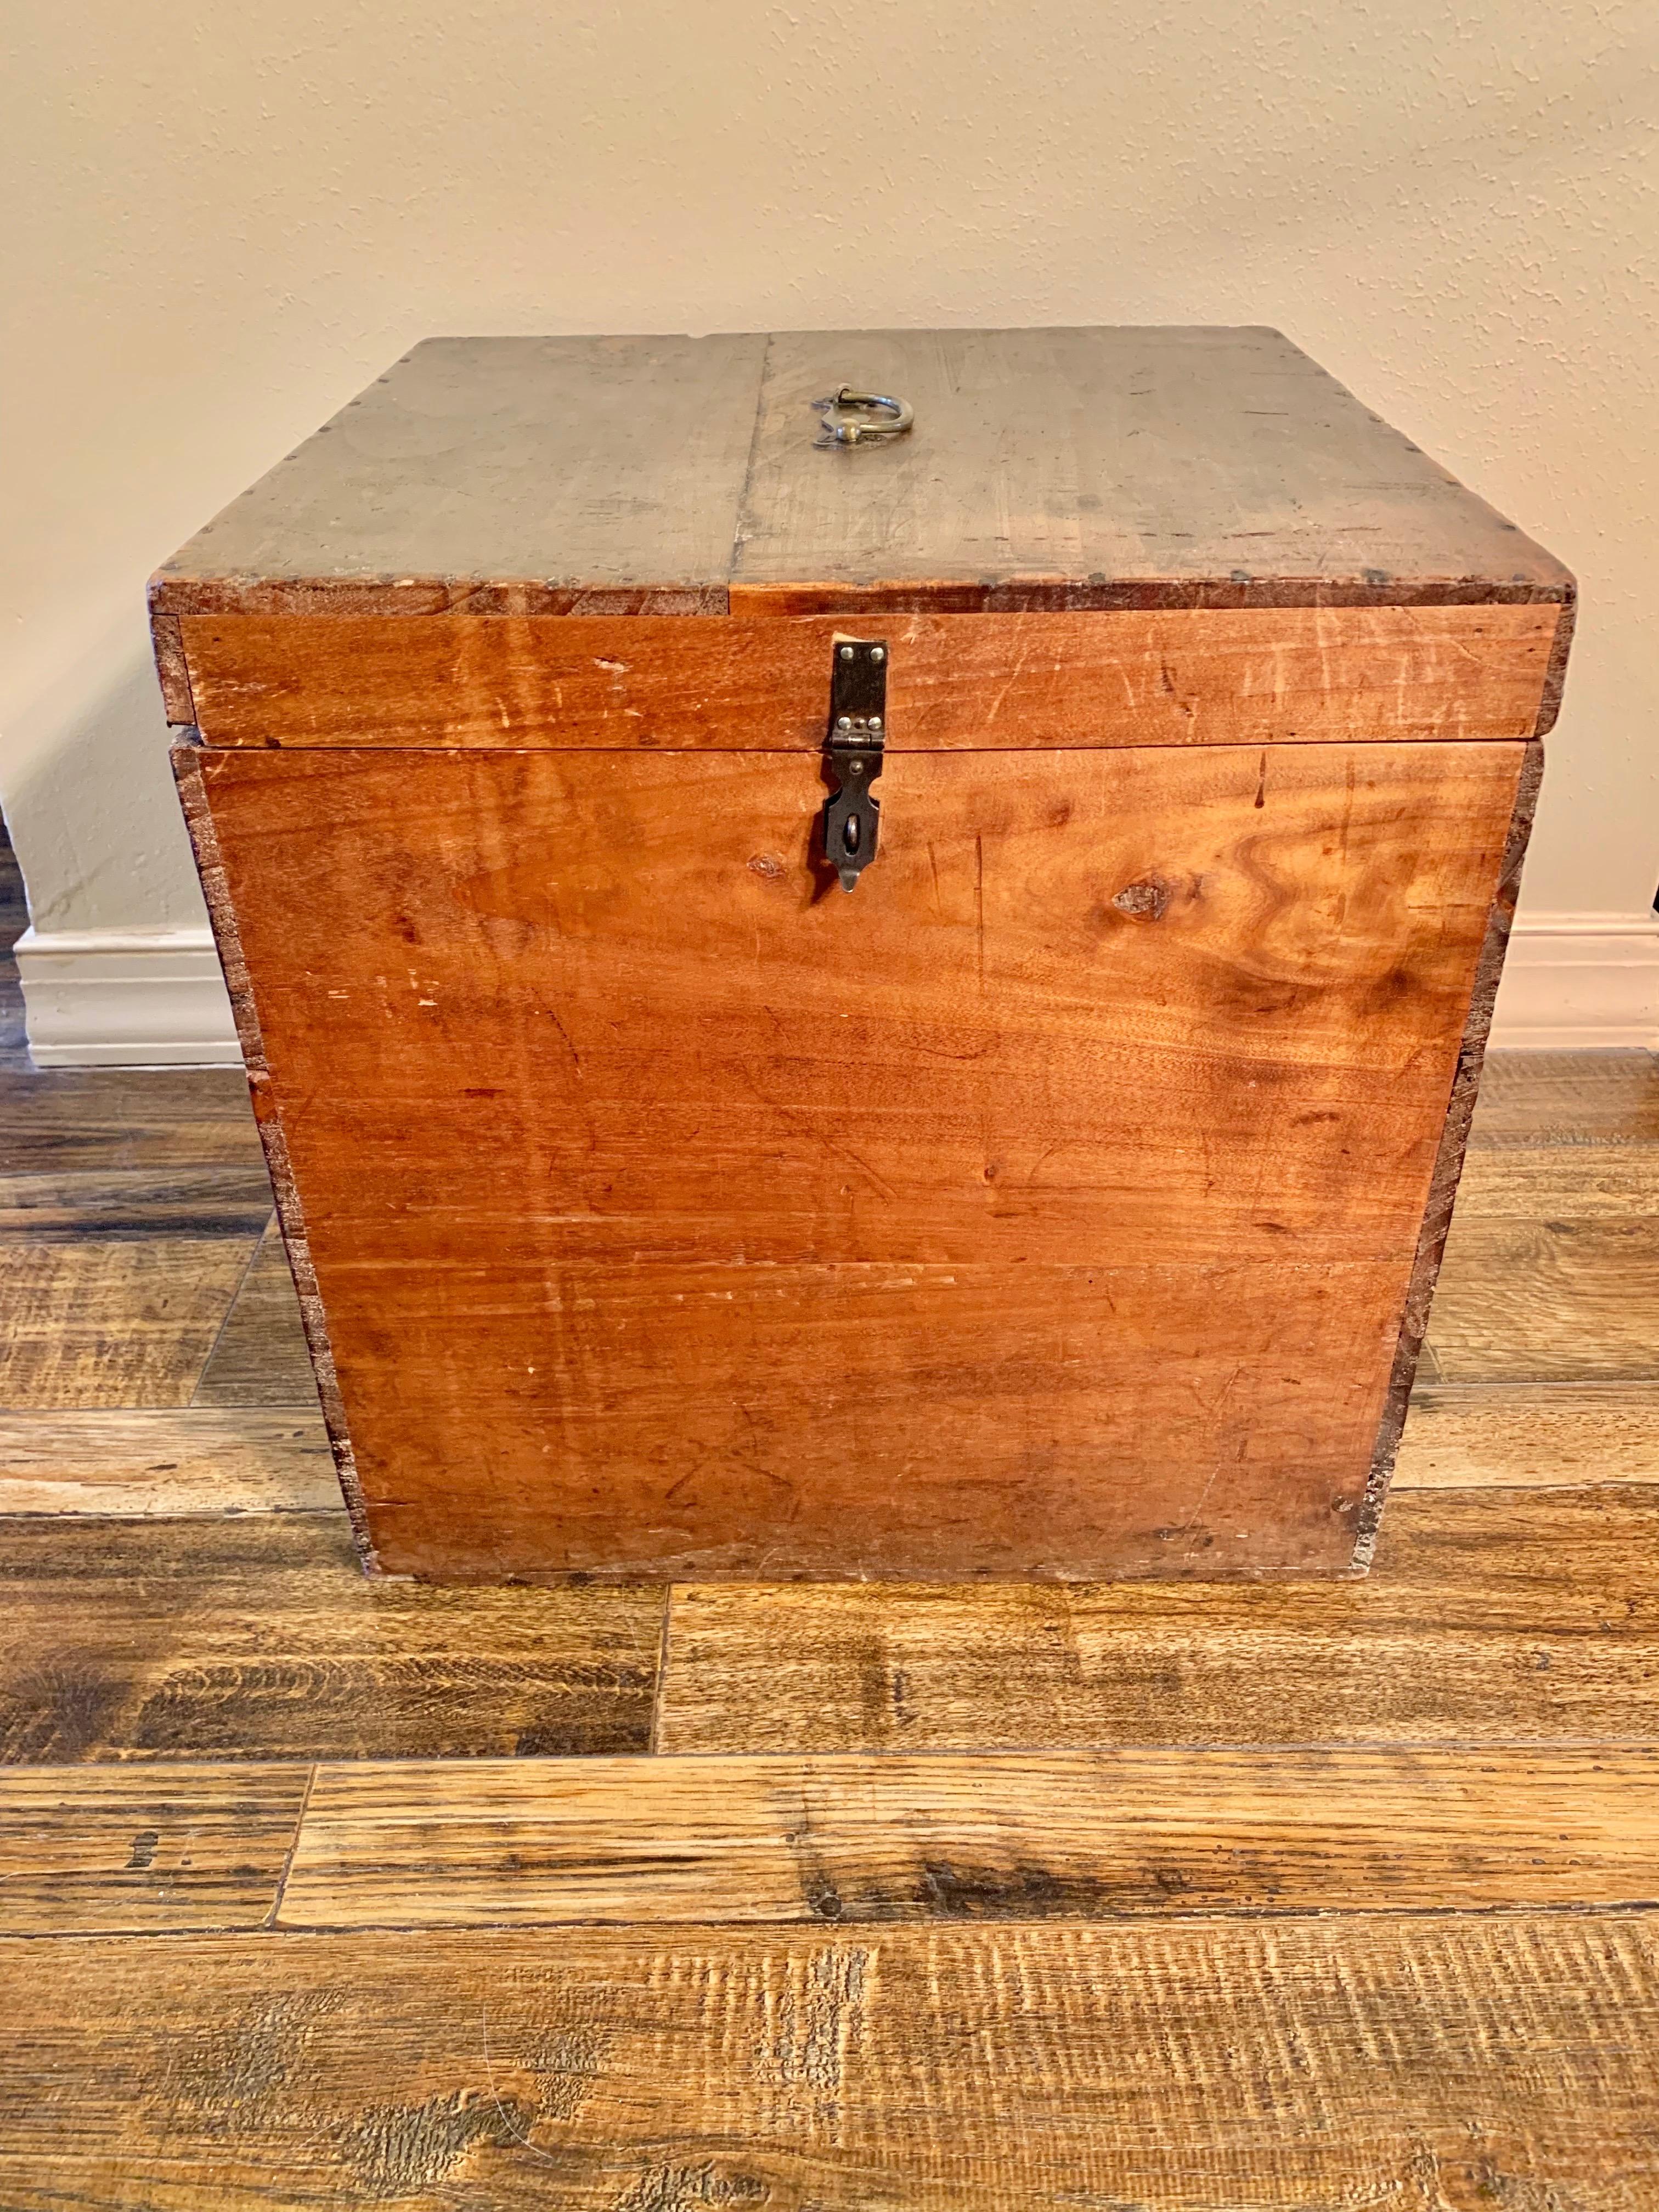 Found in the South of France, this wooden box was handmade in France in the early 20th Century. The piece presents nailhead trim around the edges, a brass handle on the top and a metal hinge locking mechansism. The hinge locking mechanism looks to